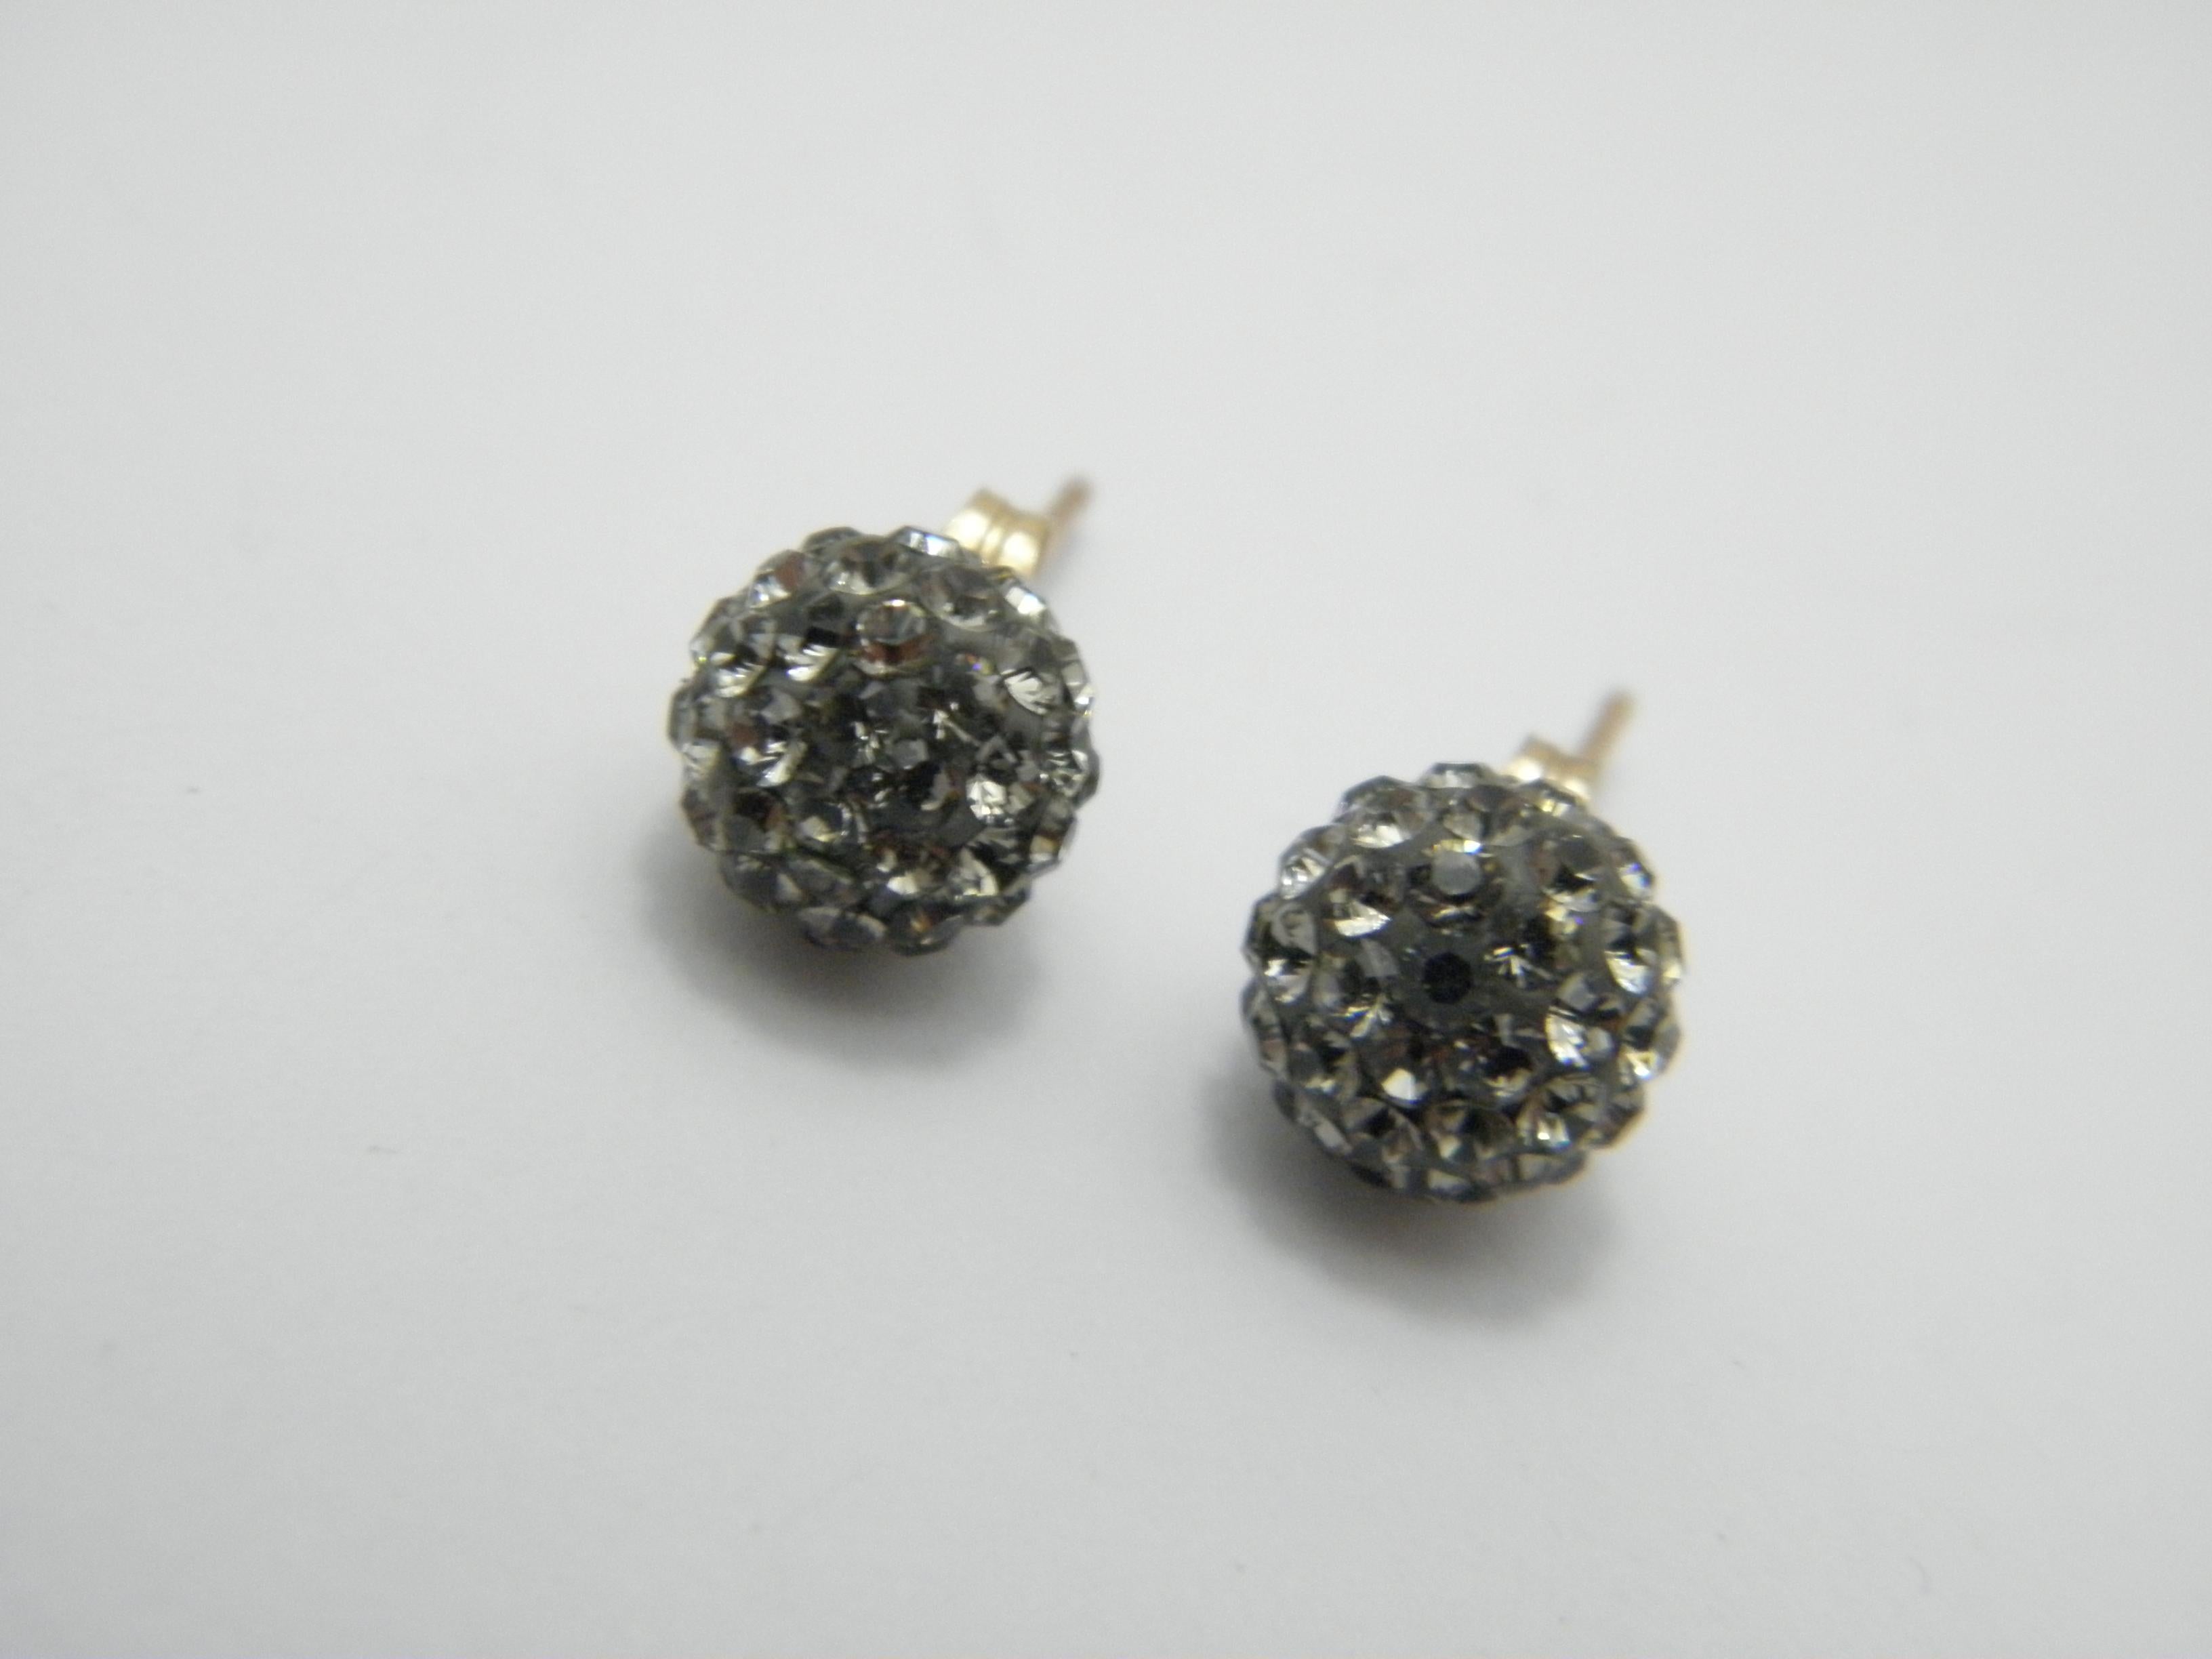 Contemporary Vintage 9ct Gold Large Glitter Ball Crystal Stud Earrings 375 Purity VGC For Sale